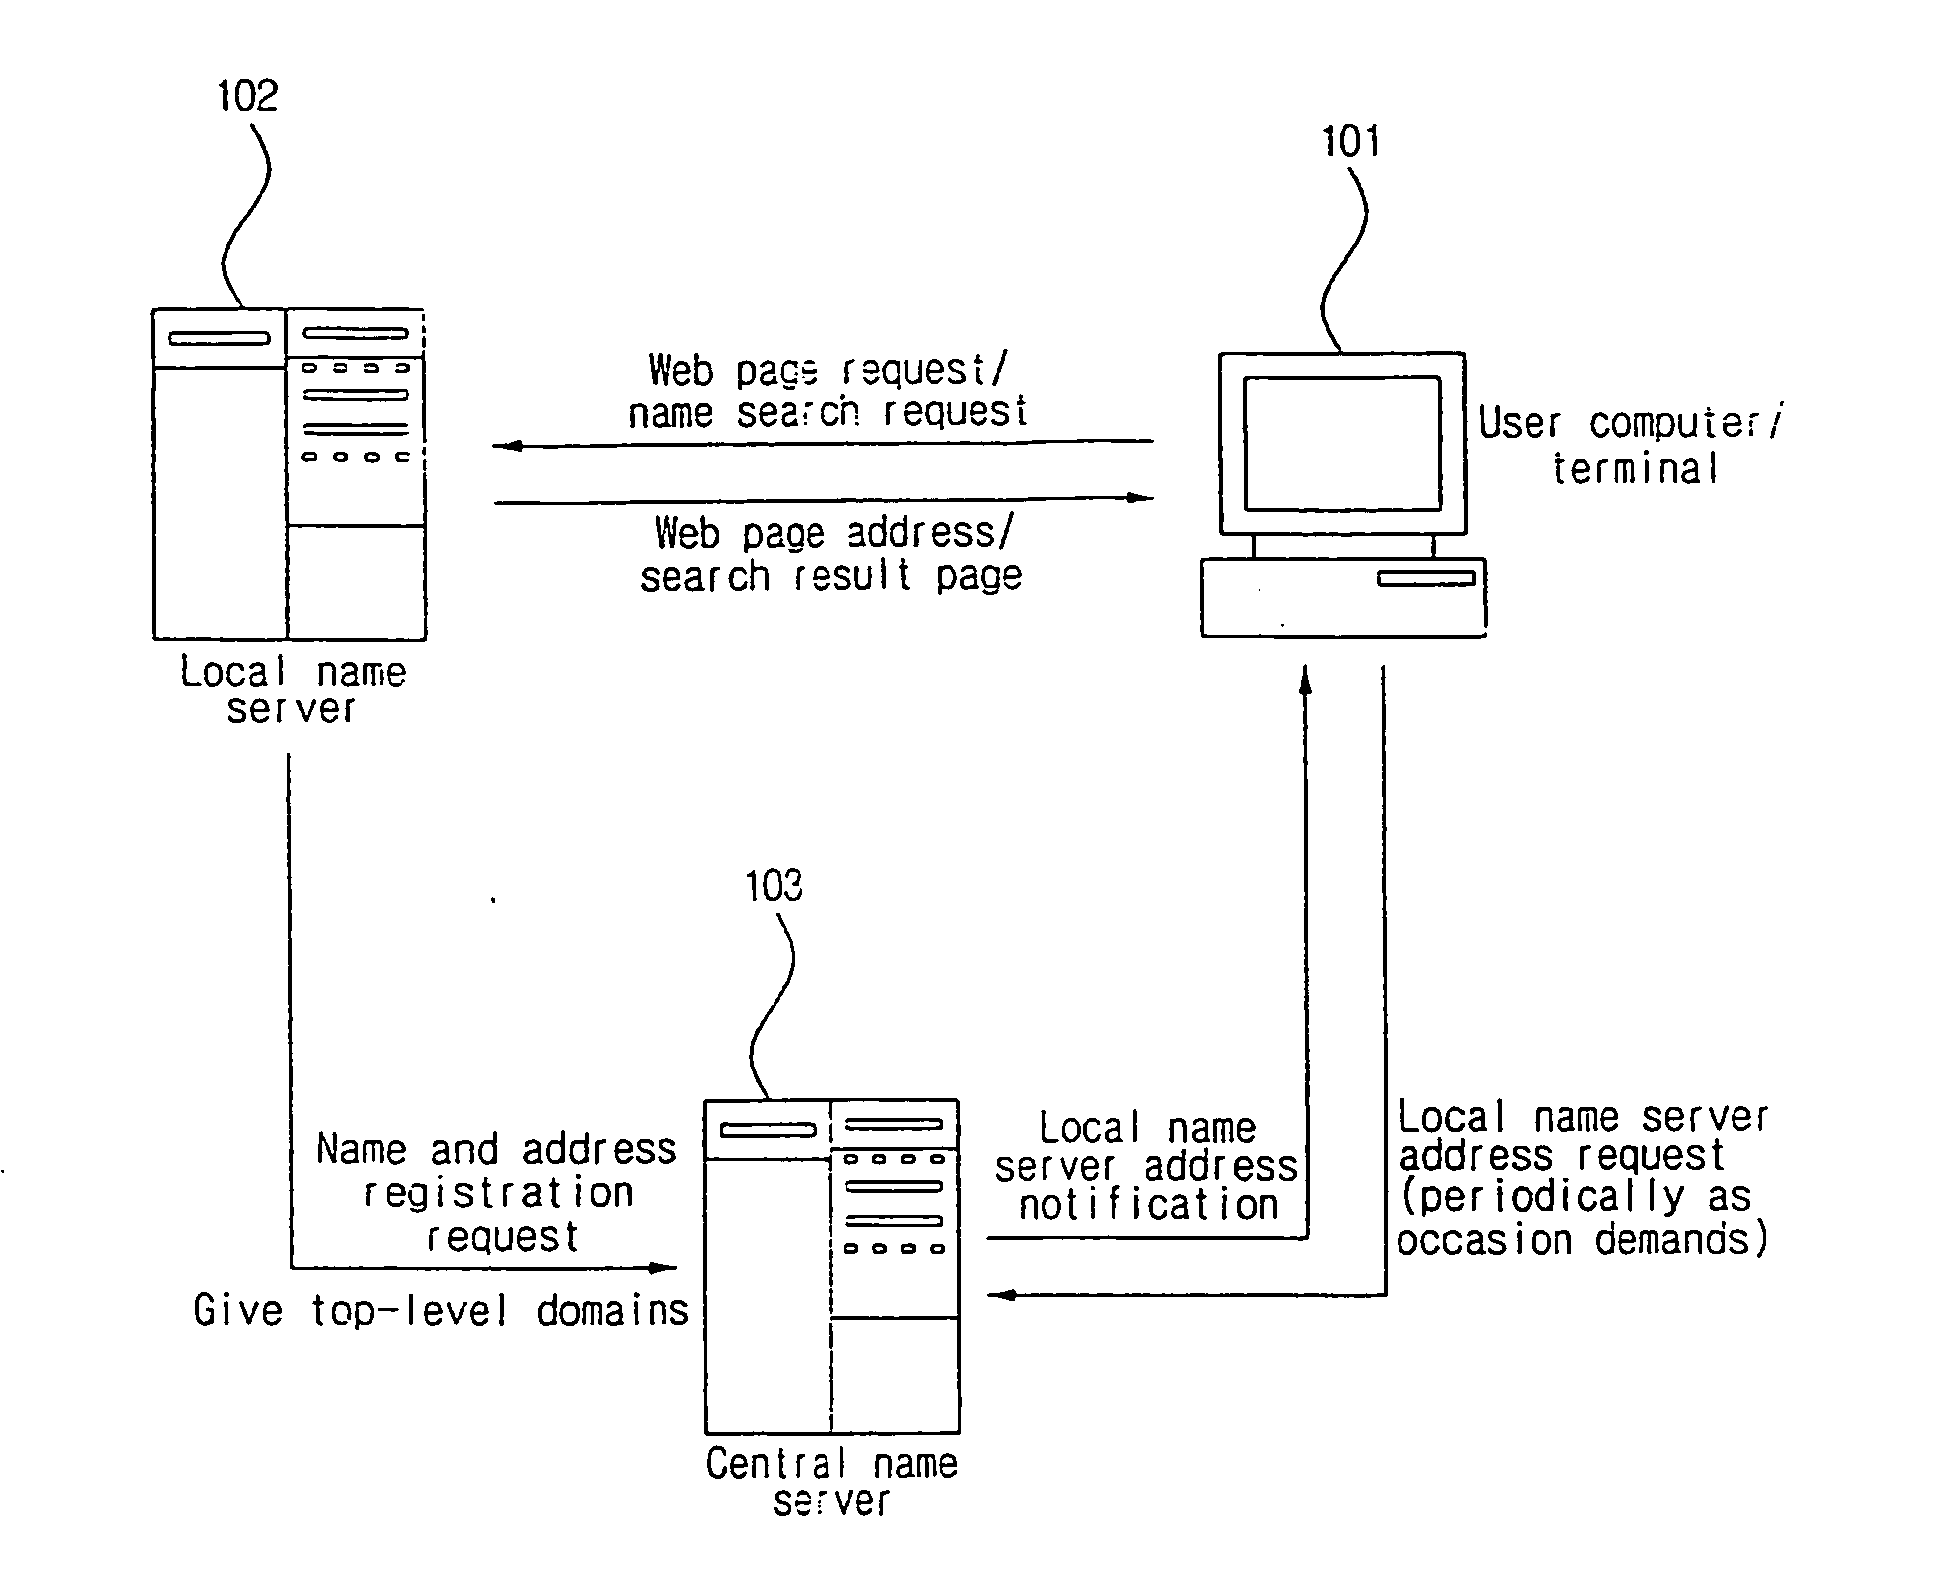 Internal natural domain service system with local name servers for flexible top-level domains